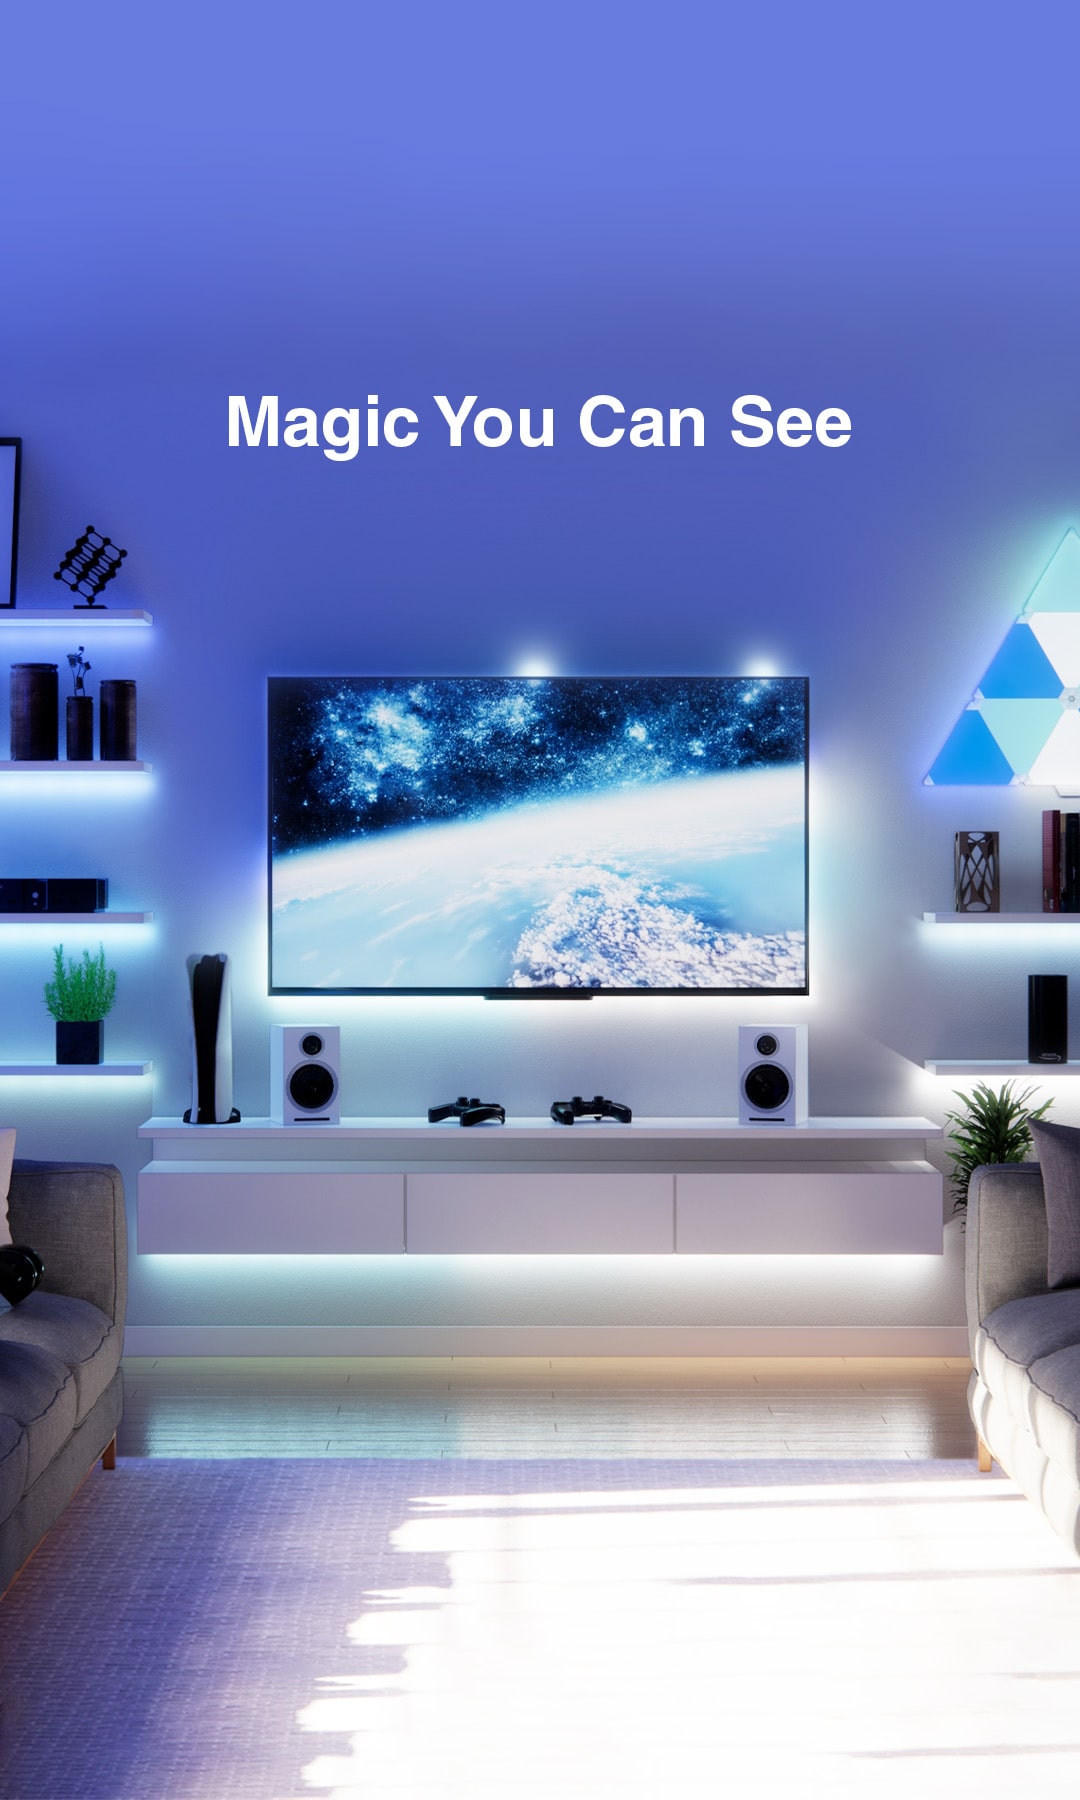 A cheap set of LEDs is the best way to upgrade your fancy new TV